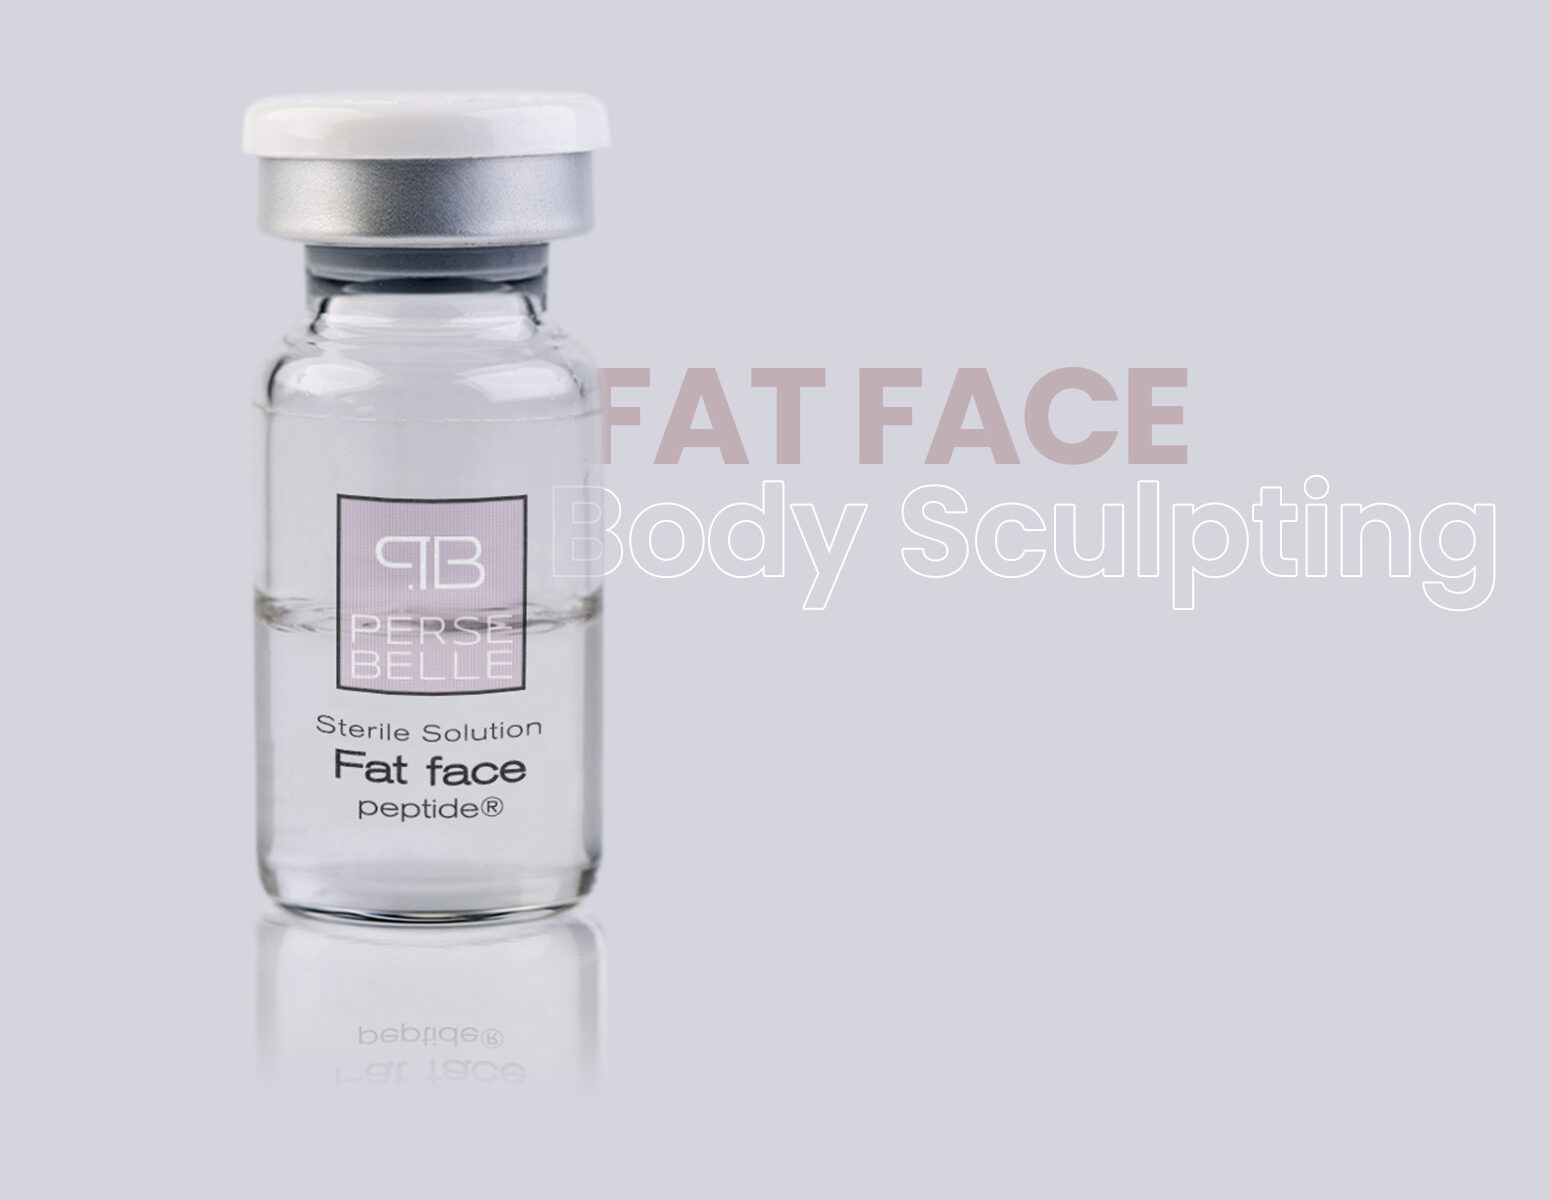 Fat Face sculpting treatment mesotherapy - Persebelle